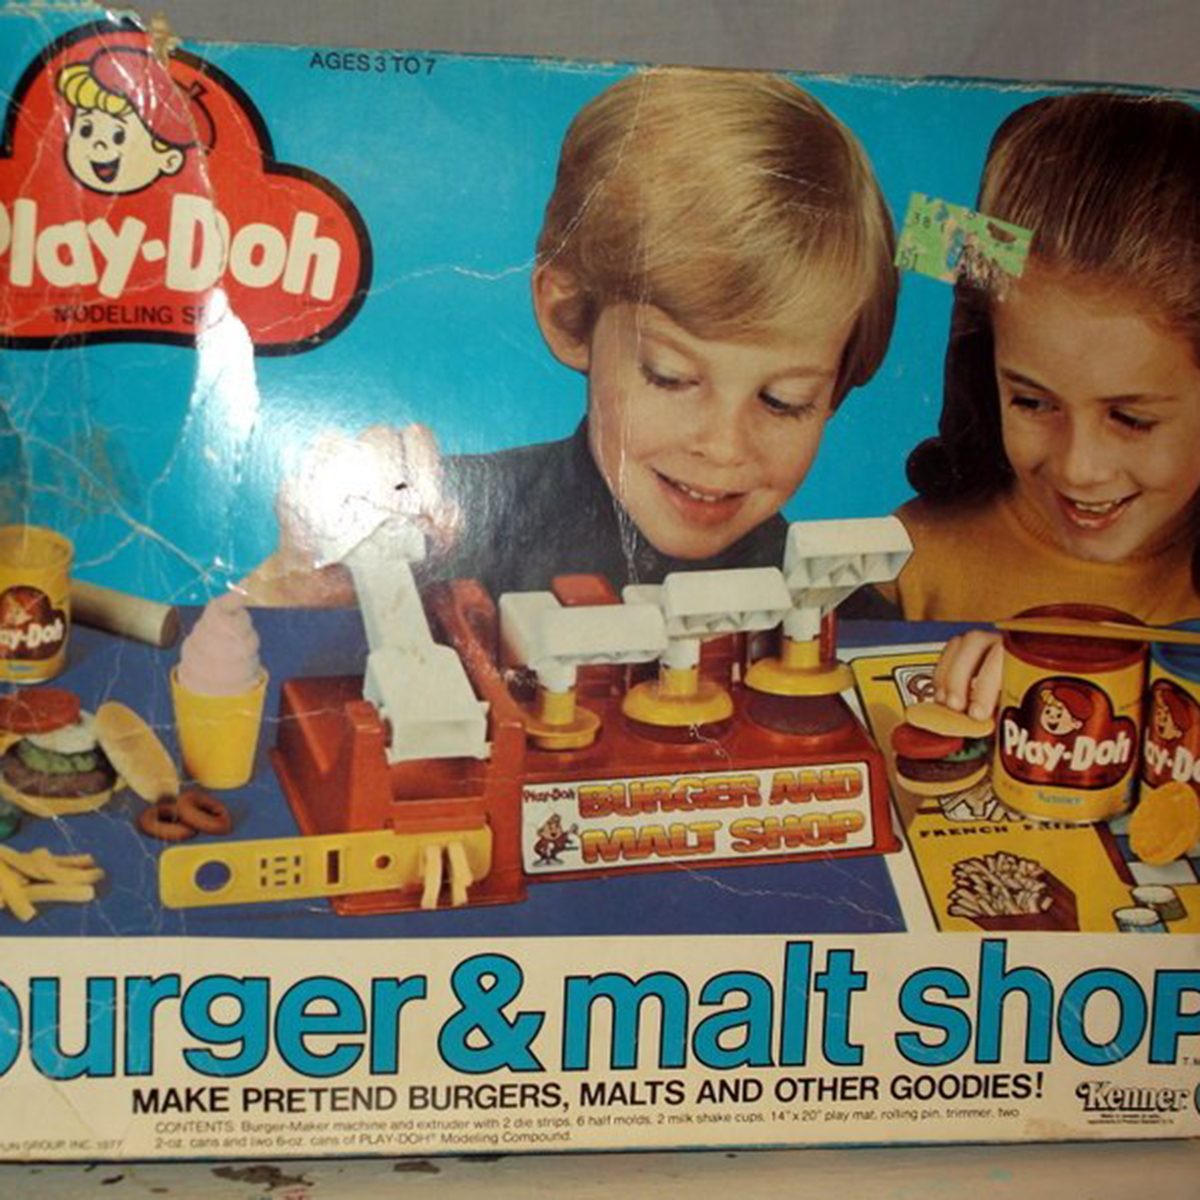 15 Vintage Toys That Sparked Our Love for Cooking | Taste of Home